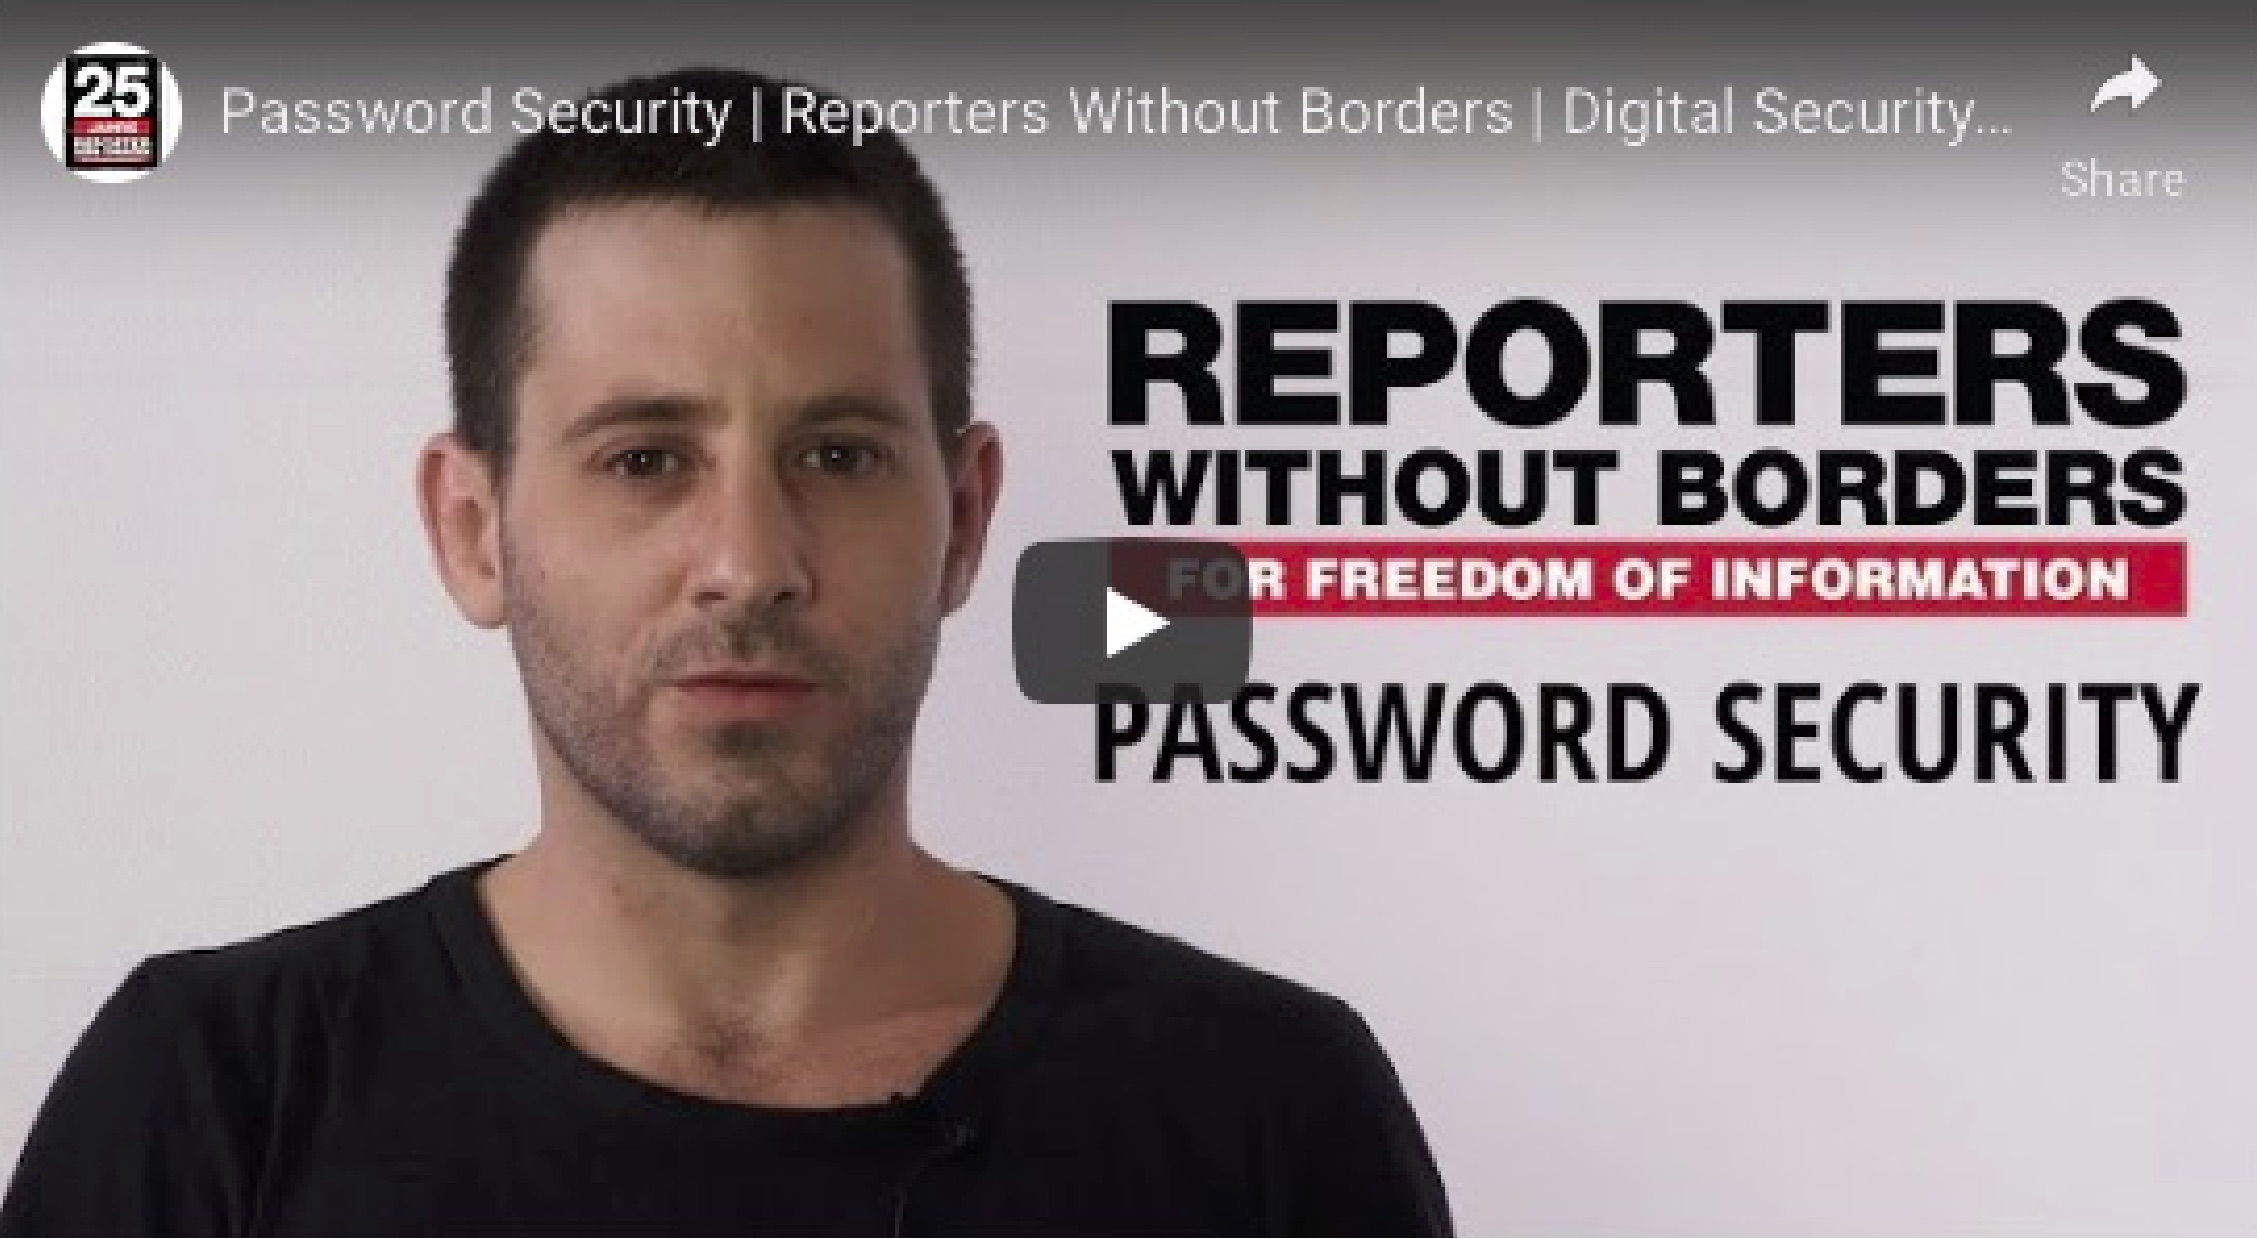 Helpdesk For Digital Security Reporters Without Borders